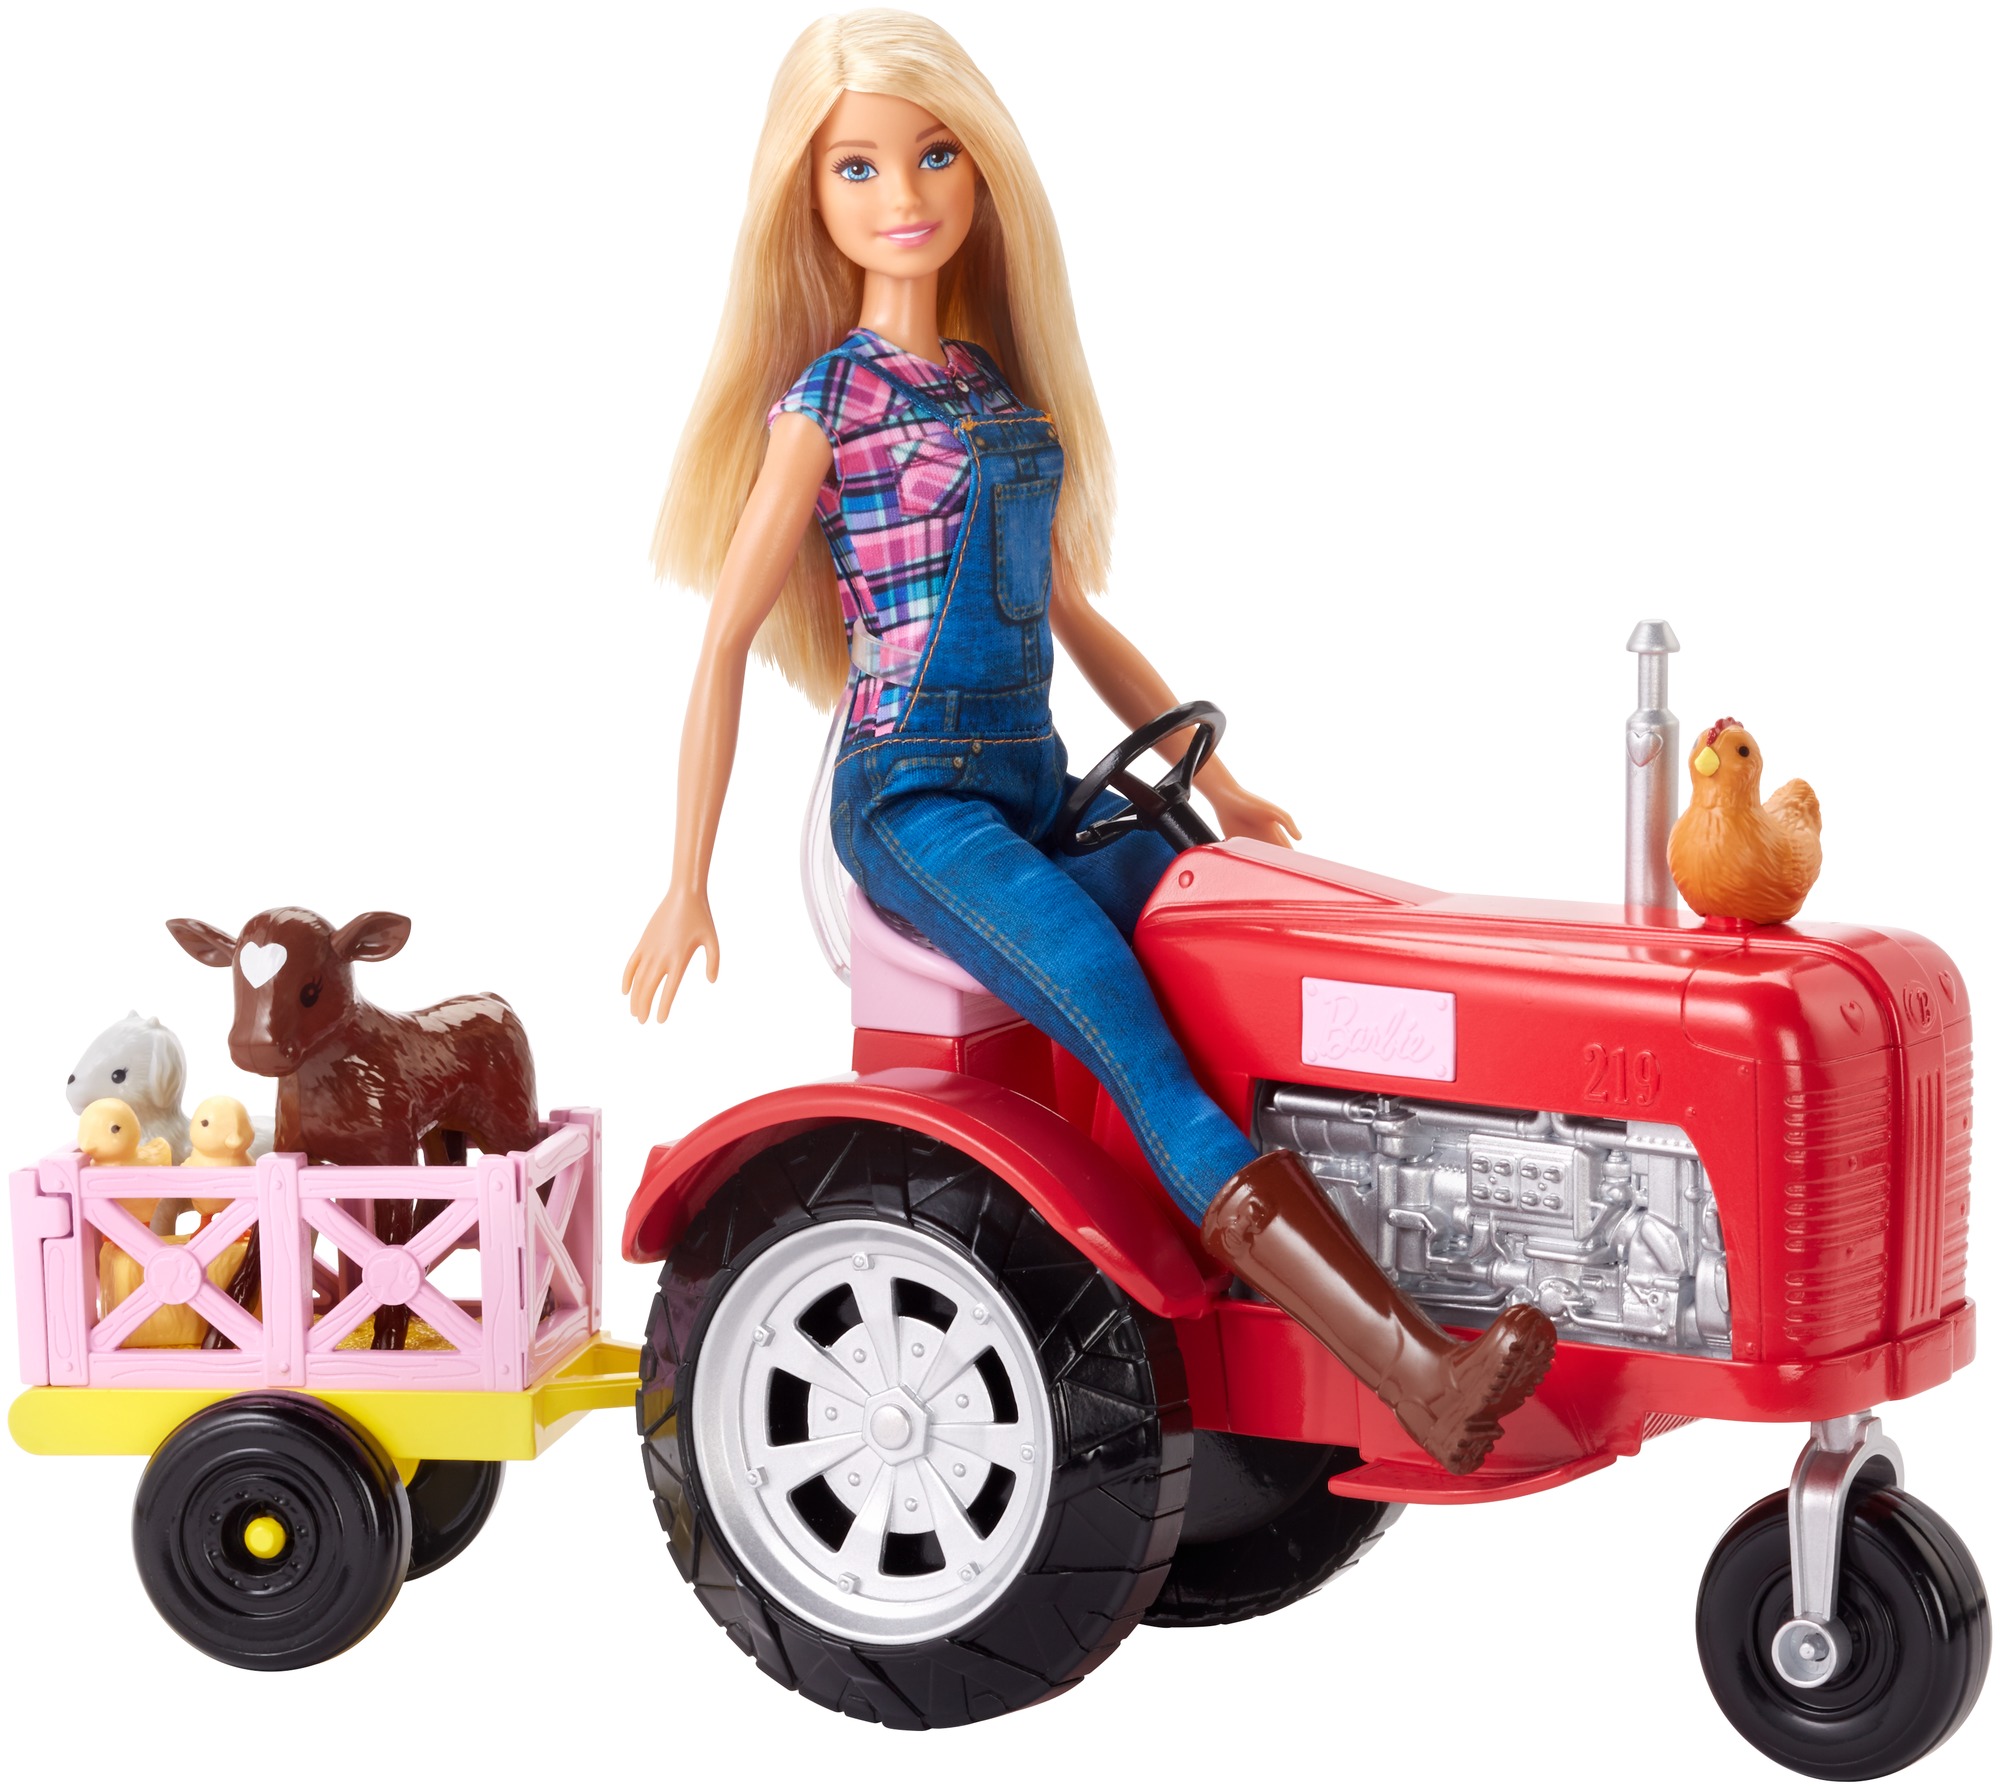 Barbie Careers Farmer Doll and Tractor with Themed Accessories - image 1 of 12